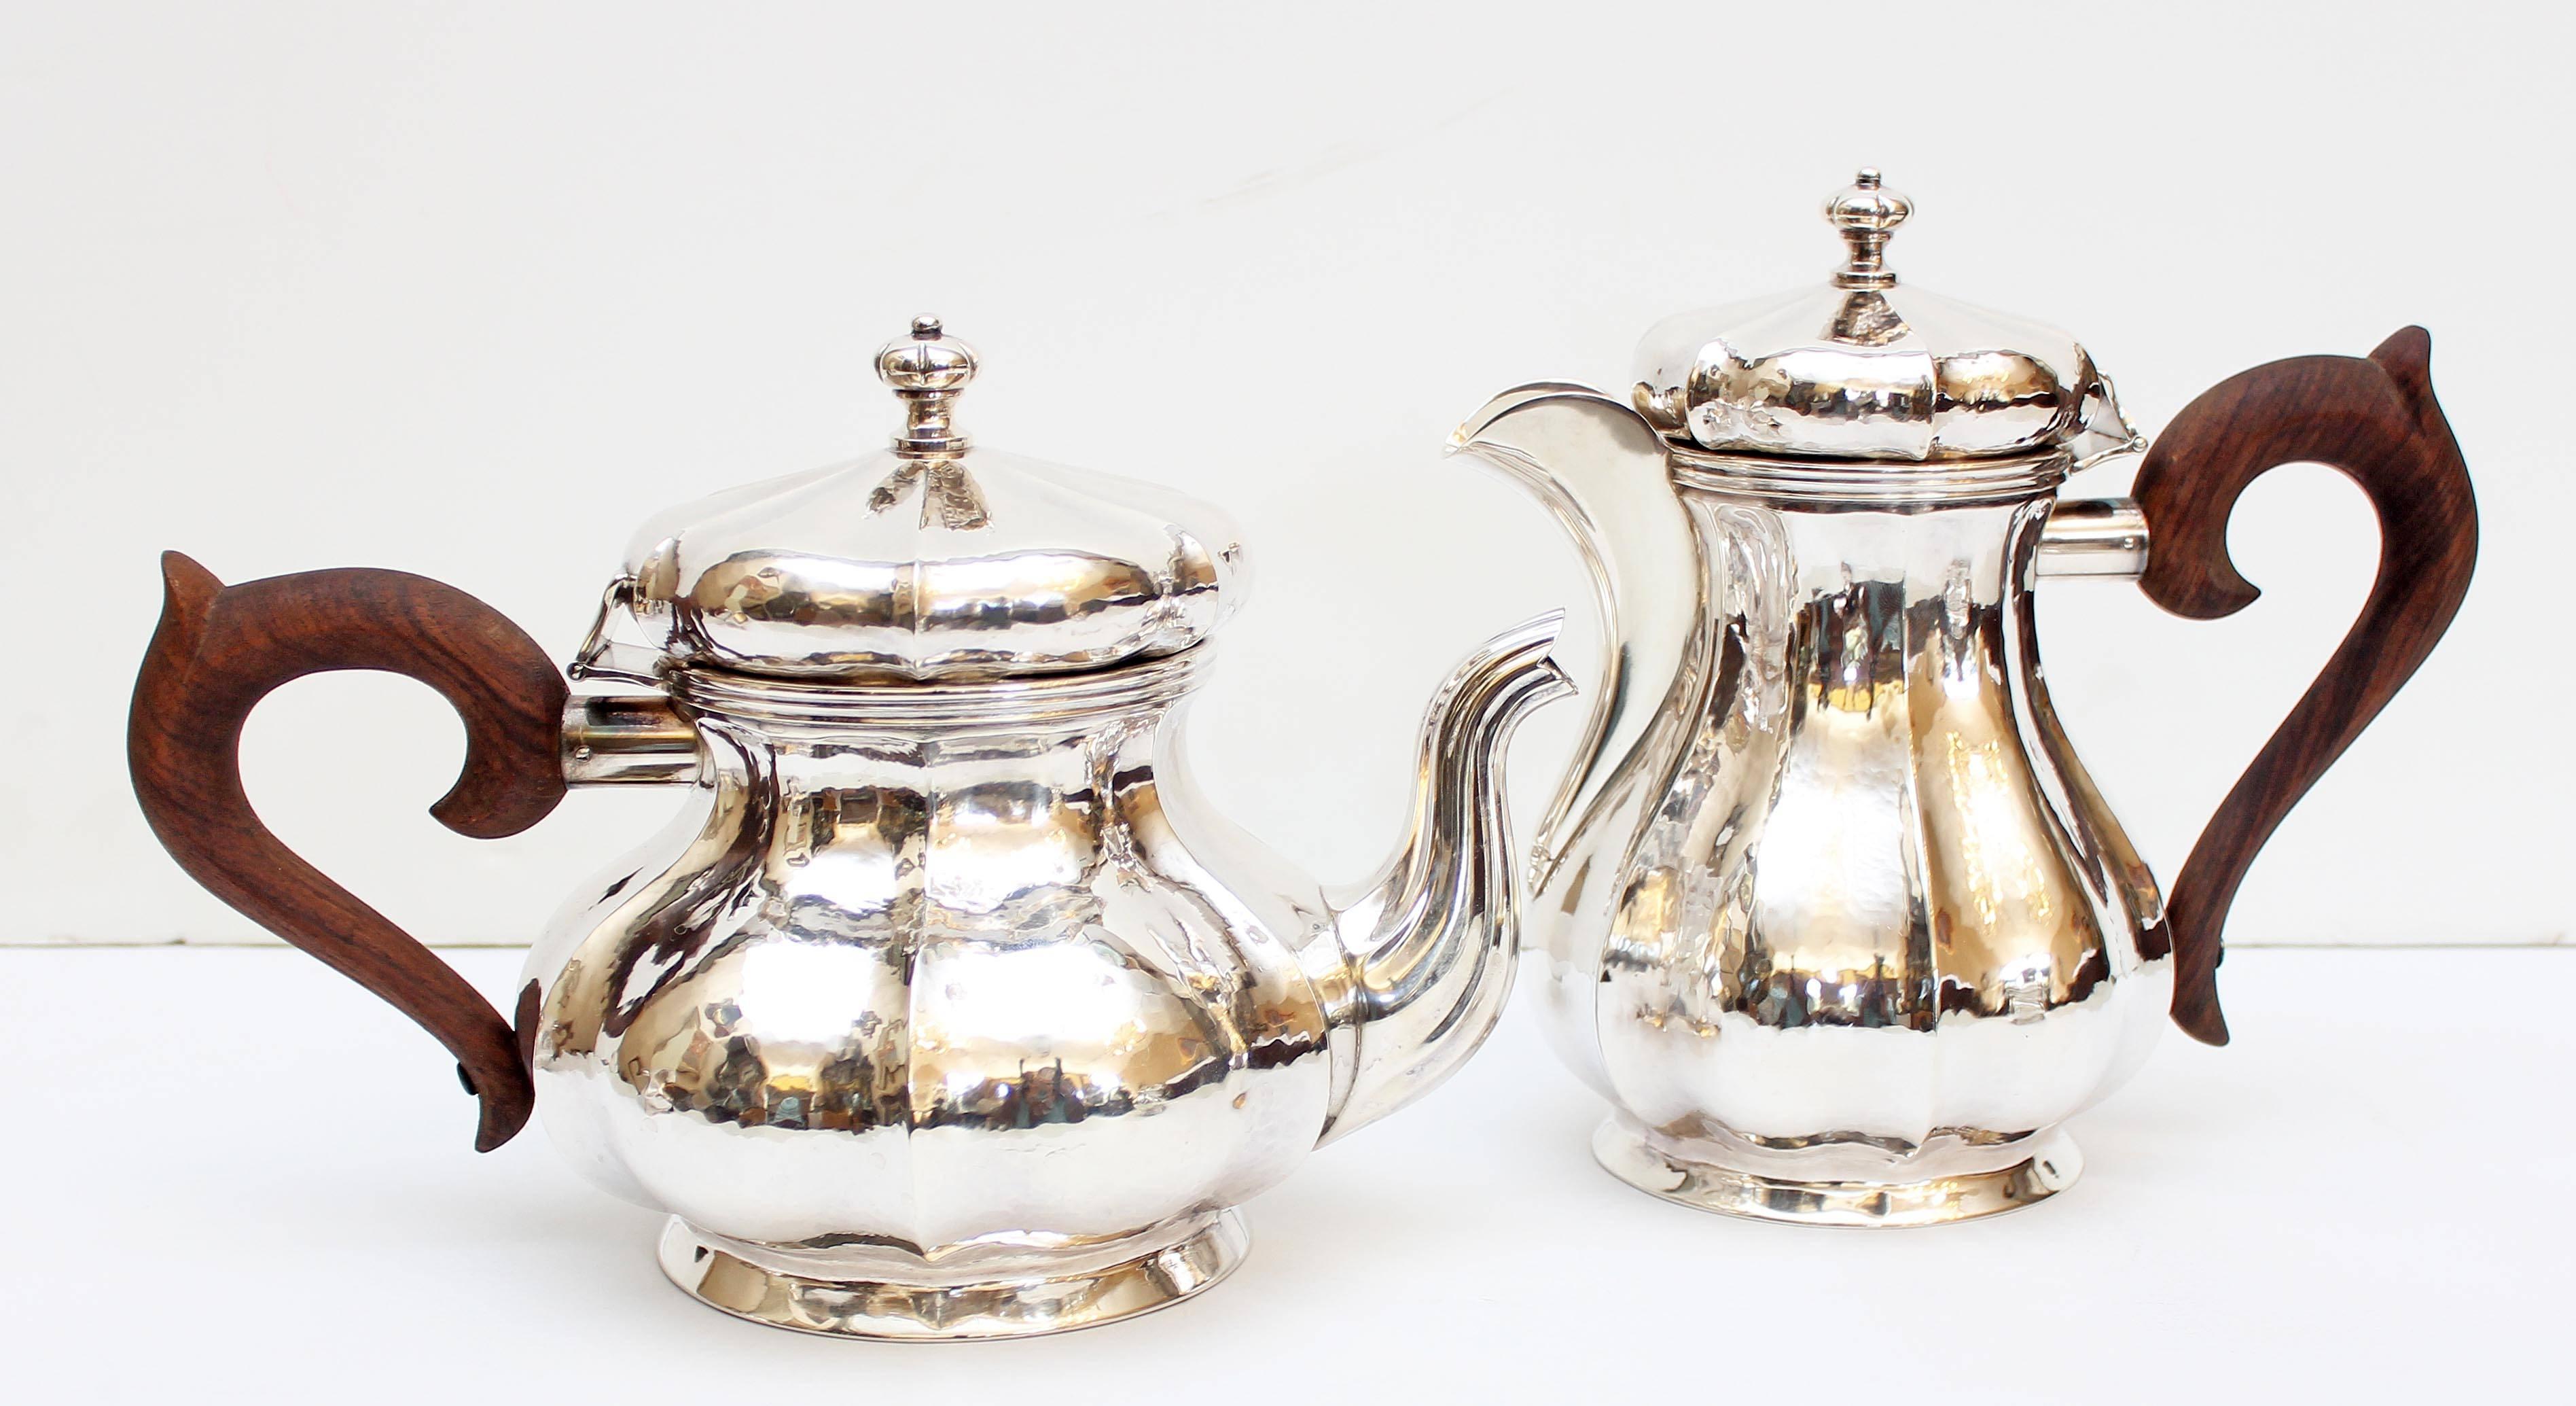 Sterling silver tea and coffee service. Each piece with hand-hammered lobed bodies and carved rosewood handles. Provenance: Estate of John Wehle former president of Genesee Brewery and founder of Genesee Wildlife Museum. Buccellati is an Italian